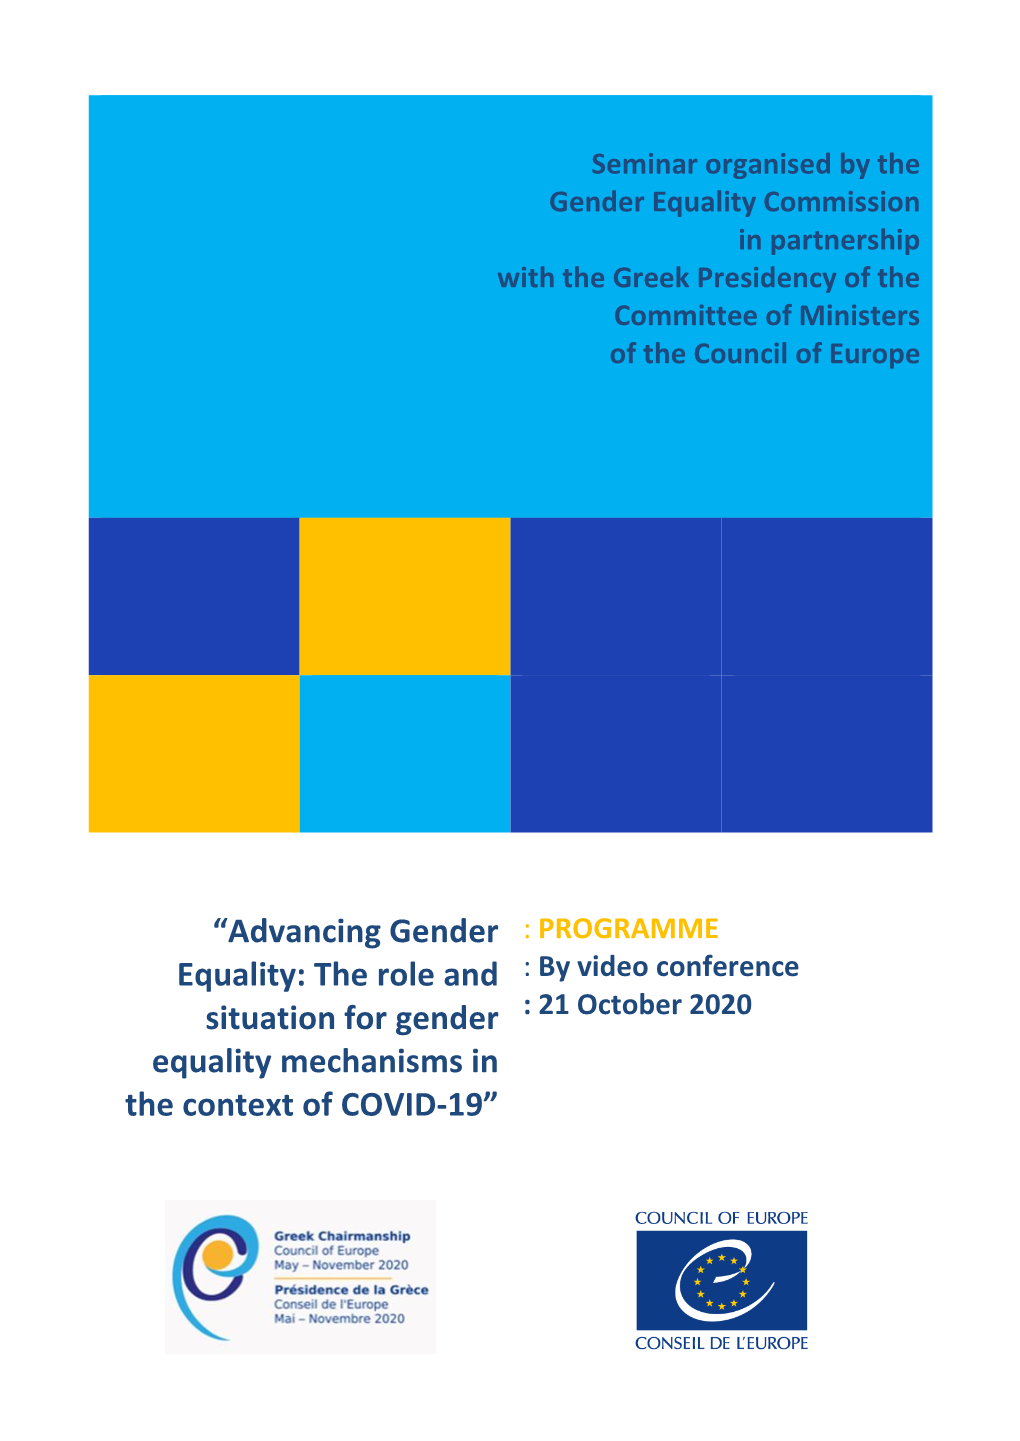 “Advancing Gender Equality: the Role and Situation for Gender